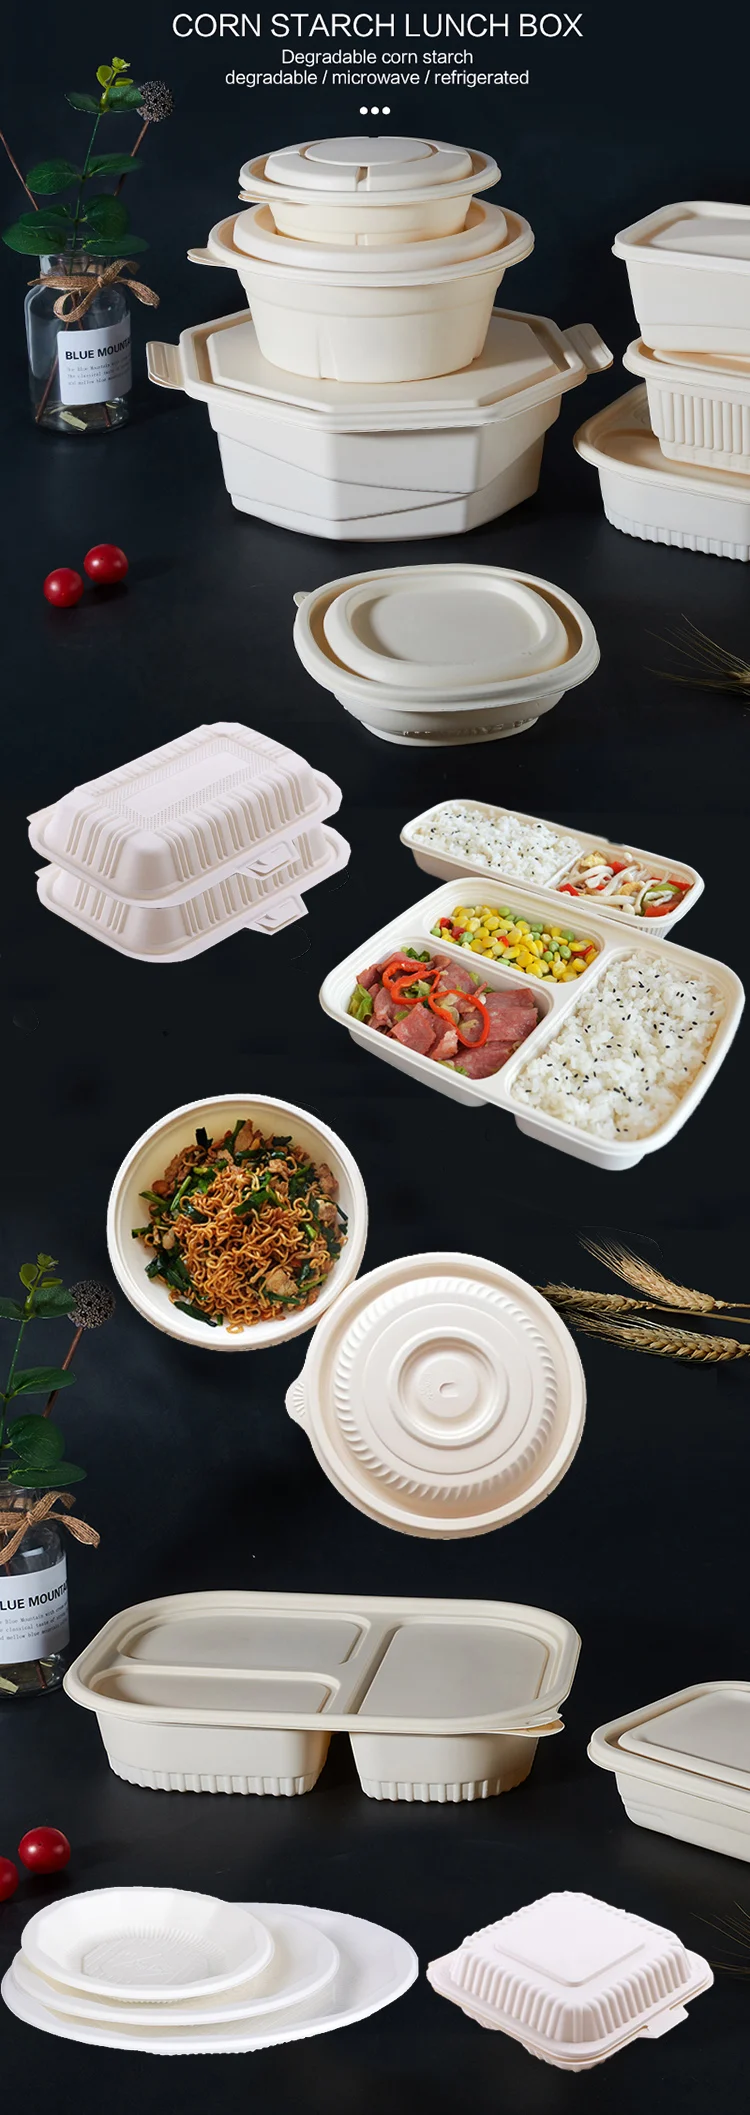 Healthy Food Plate Disposable Appetizer Plates Mini Dishes Restaurant